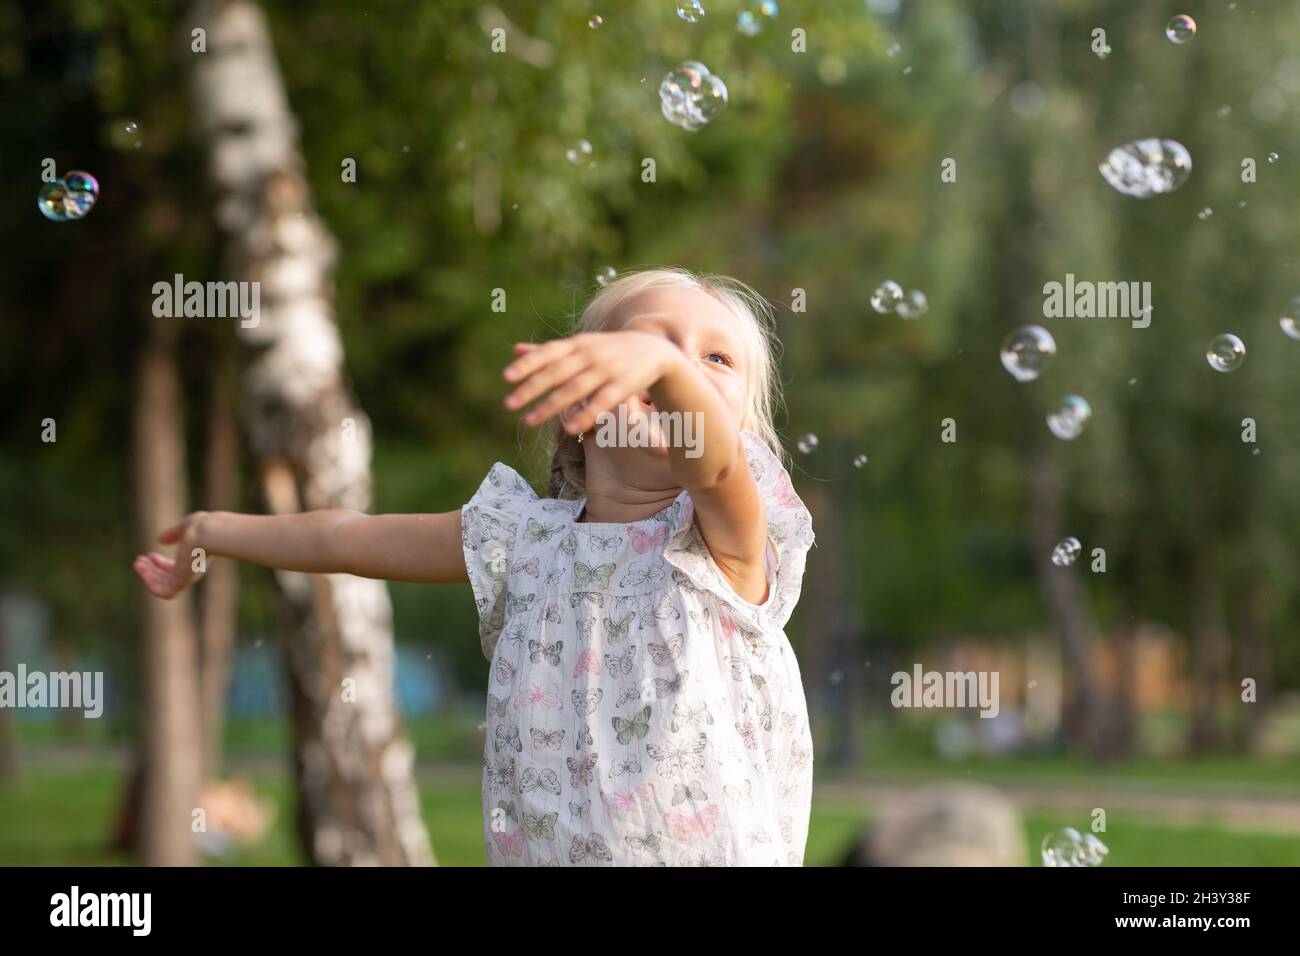 Little cute girl in the summer park blowing bubbles and having fun Stock Photo